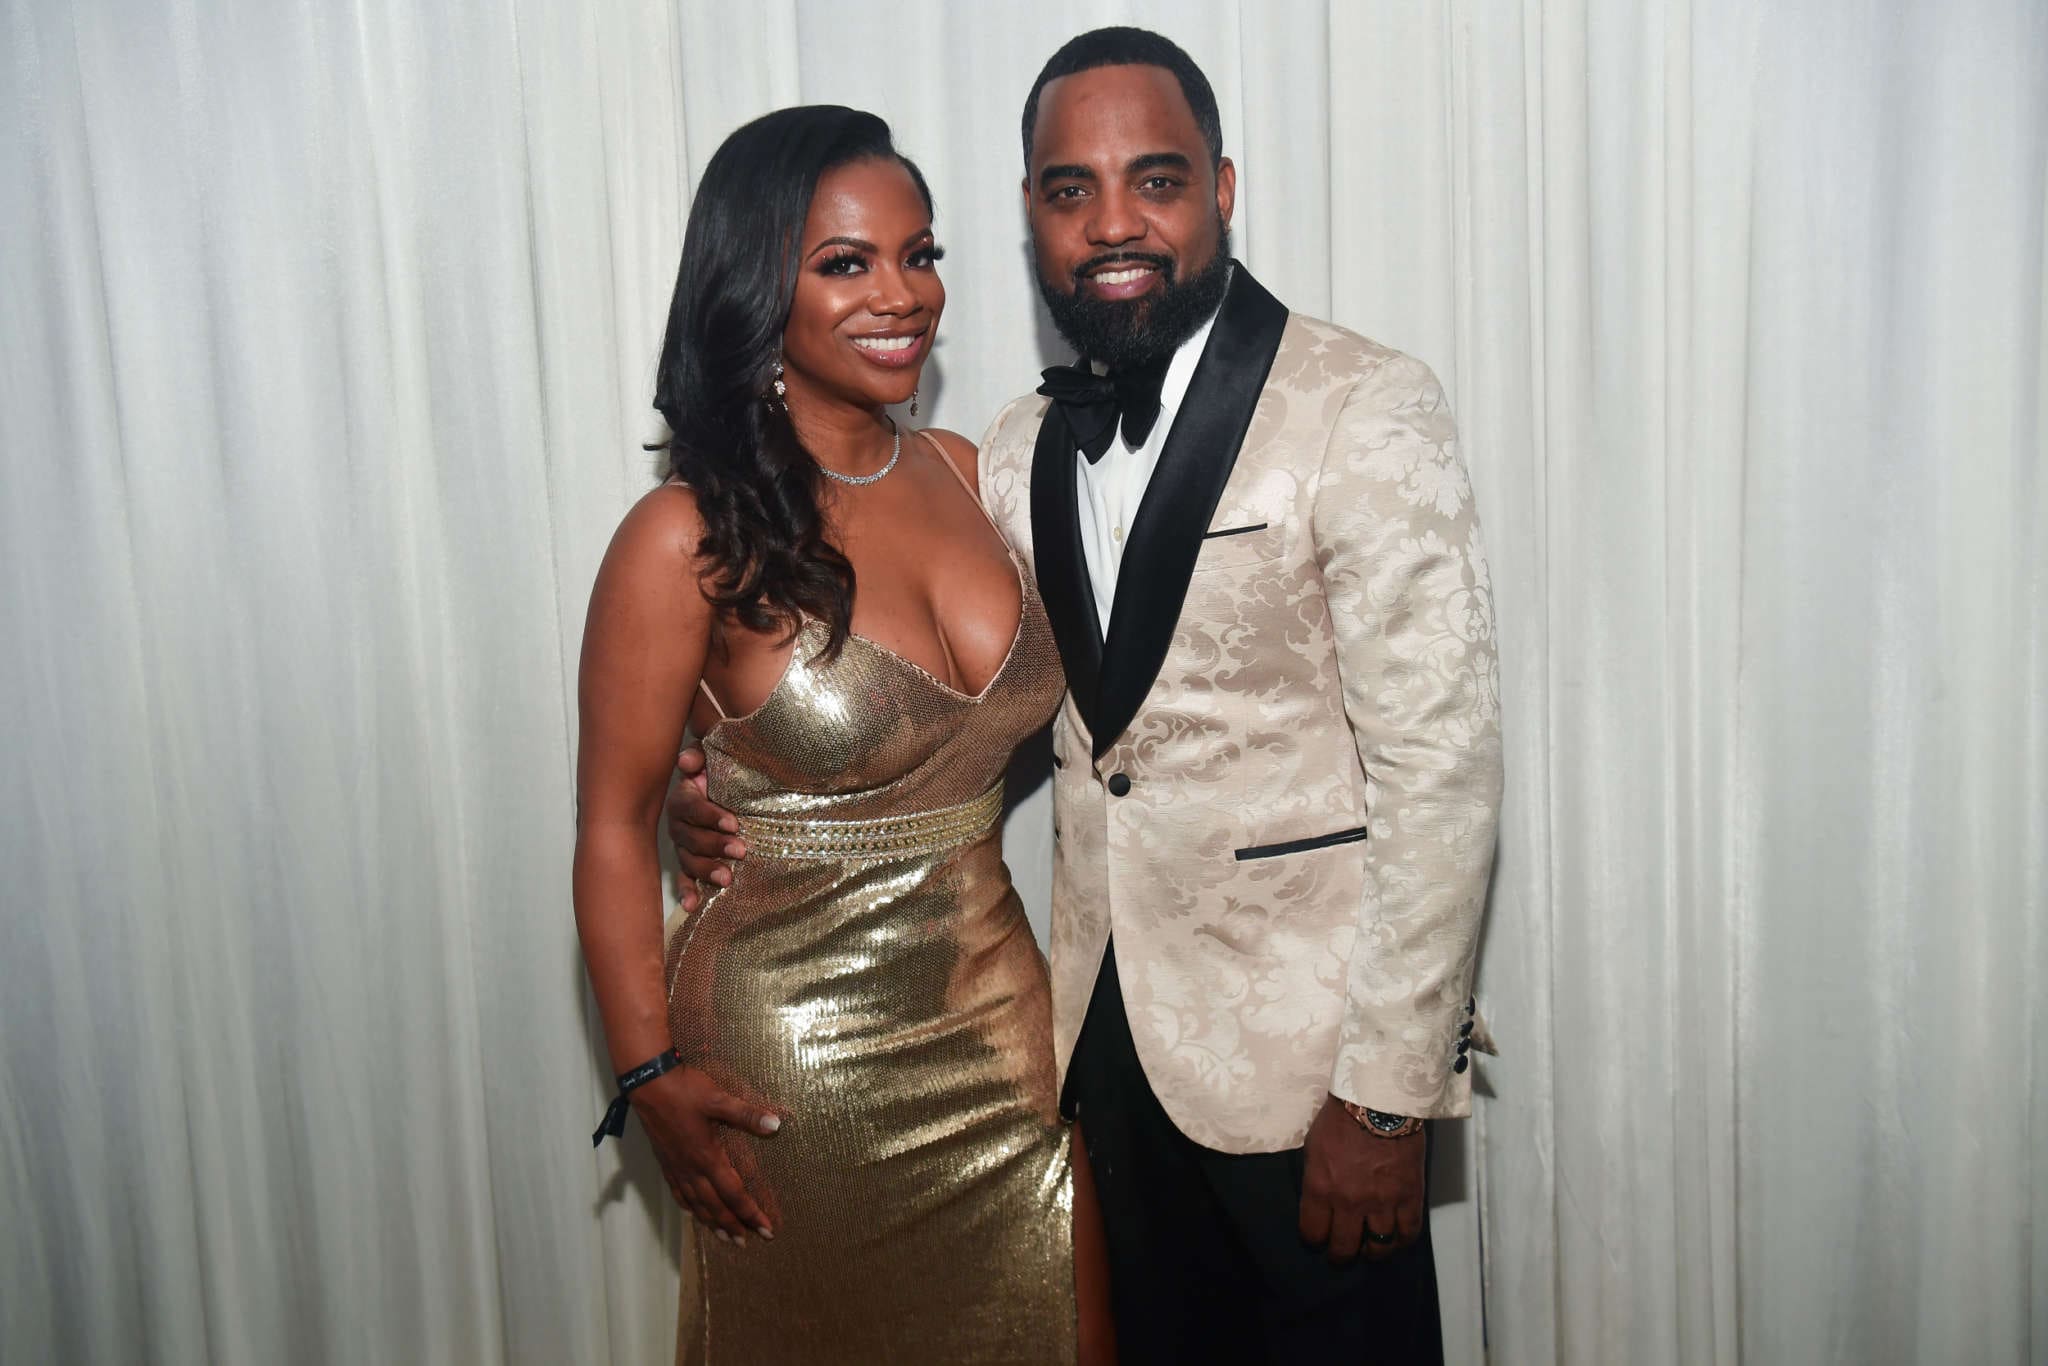 Kandi Burruss Shares A Halloween Photo With Her Kids, Ace And Blaze - Check Out The Trio!